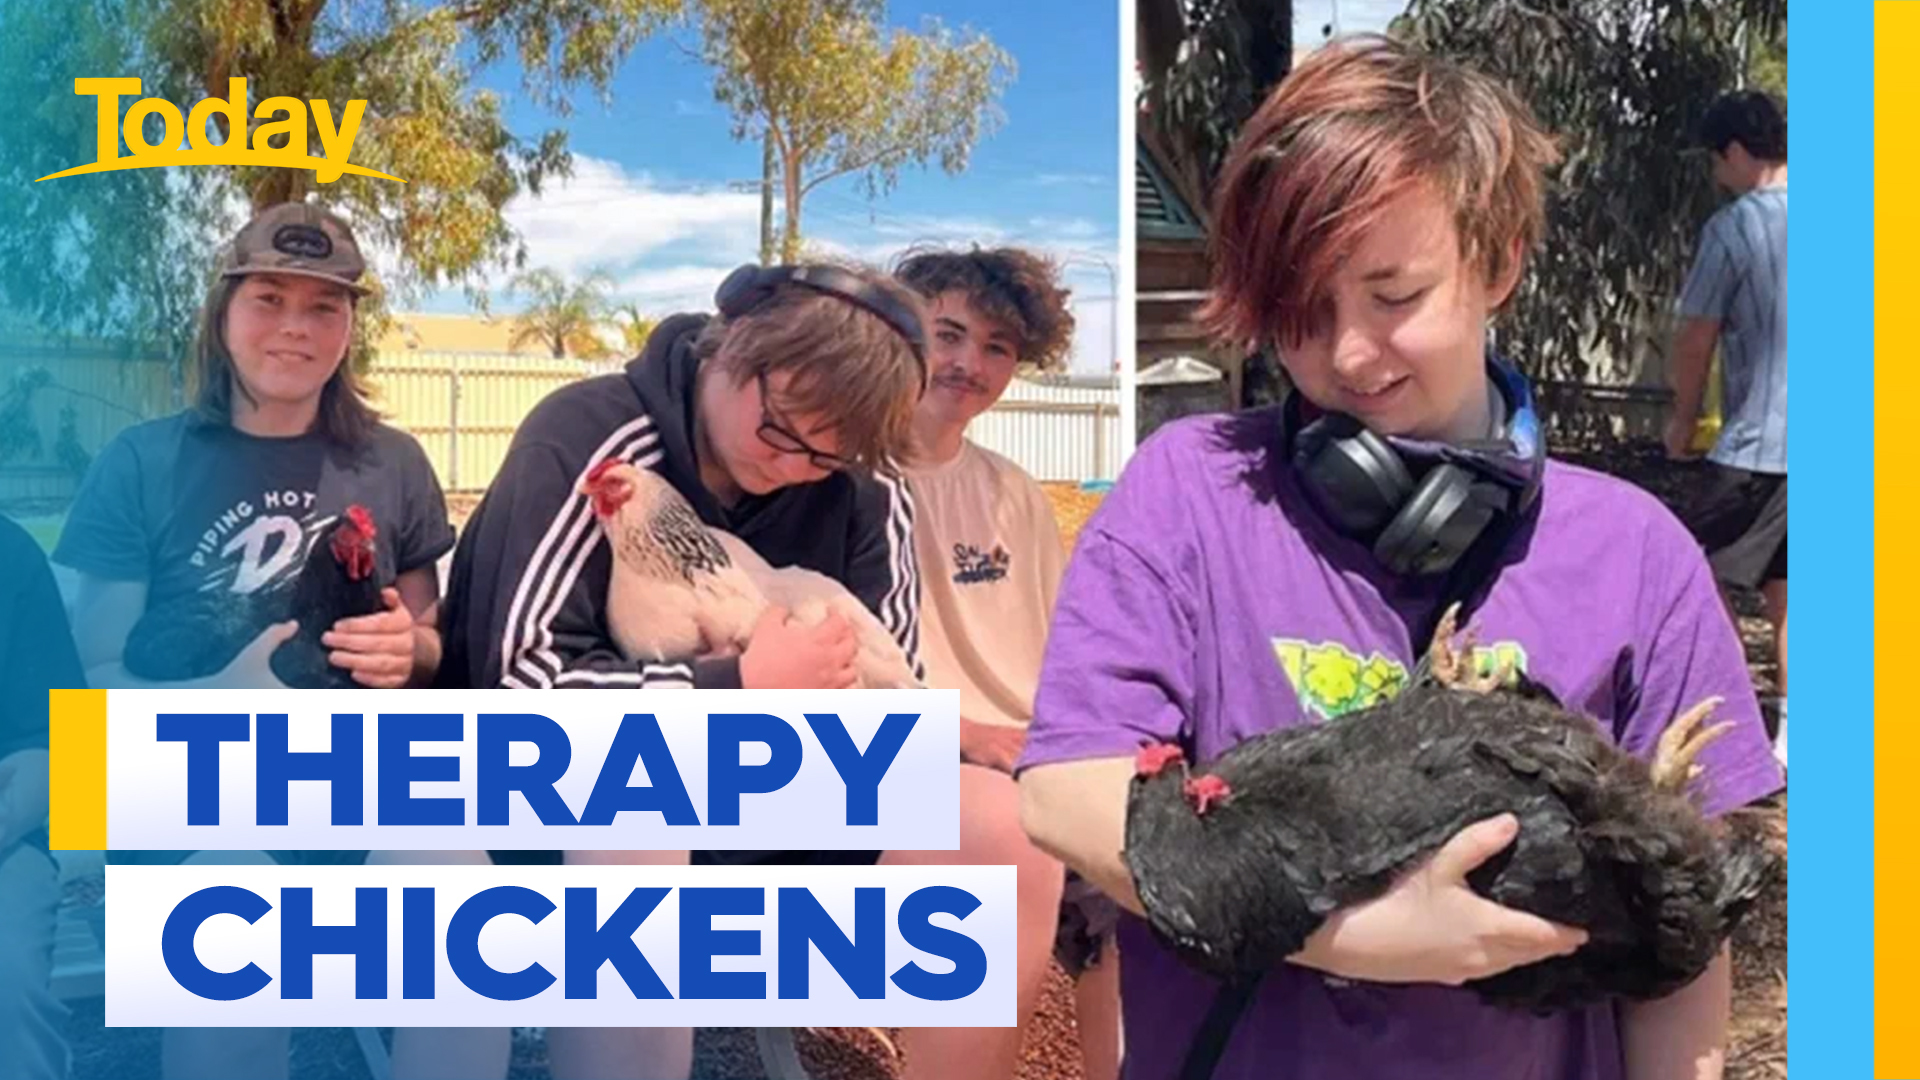 WA school using therapy chickens to help students